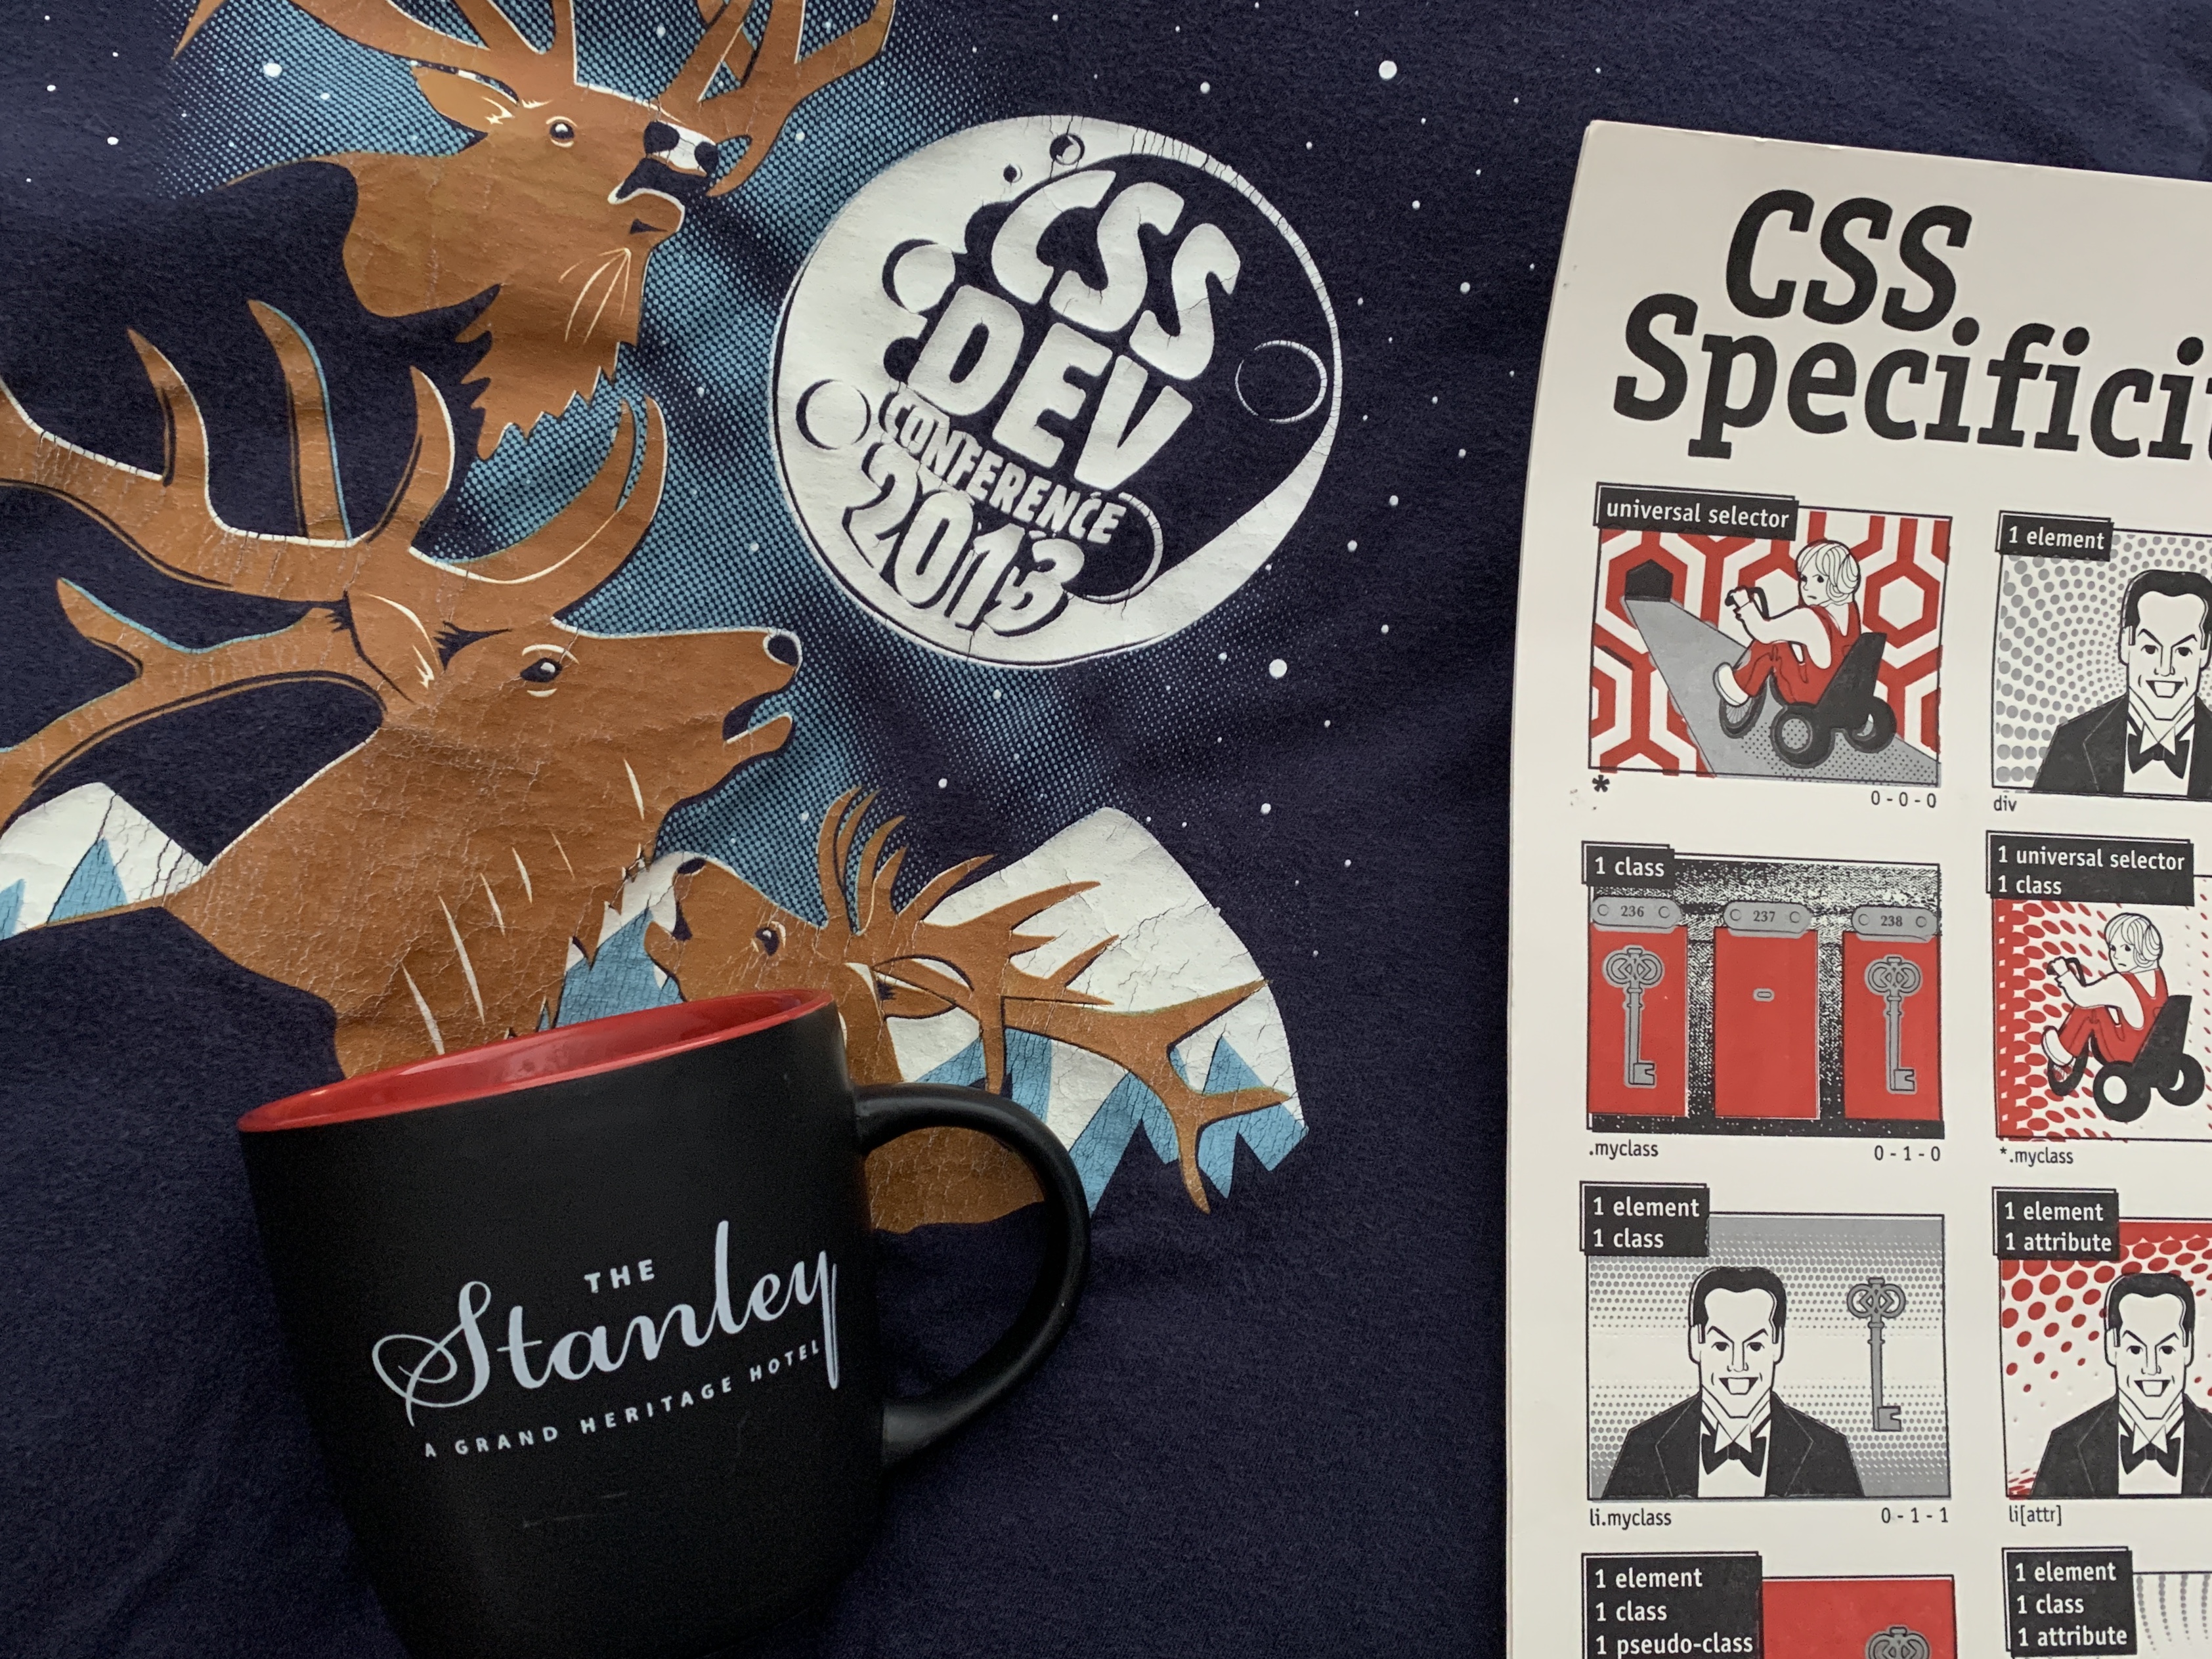 Coffee Cup (Stanley Hotel), T-Shirt (Three Elk Howling at the Moon), and Poster (The Shining + CSS Specificity) from CSSDevConf 2013